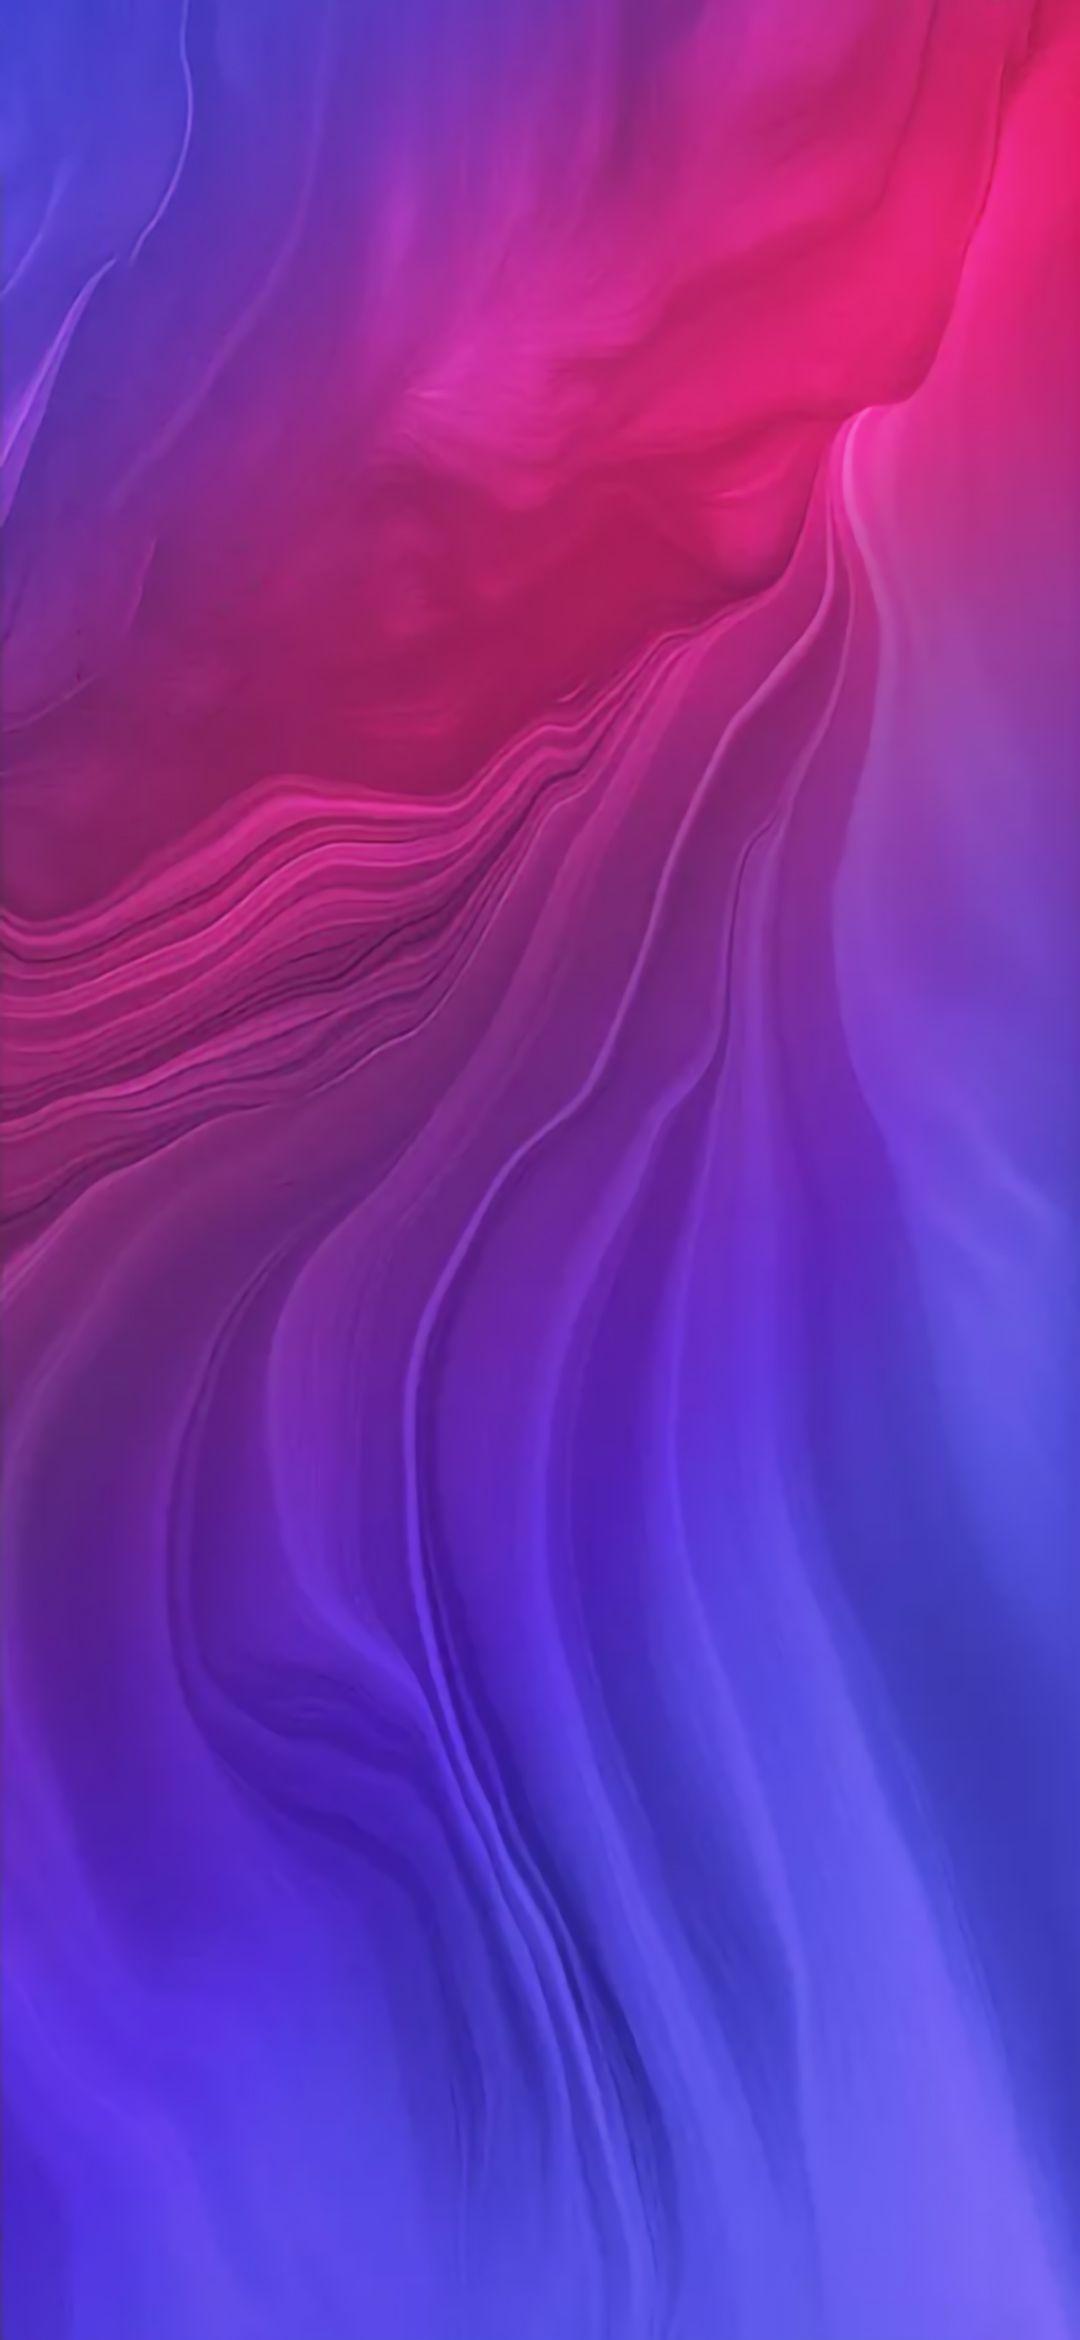 Download Oppo Reno Z Official Wallpapers Here! Full